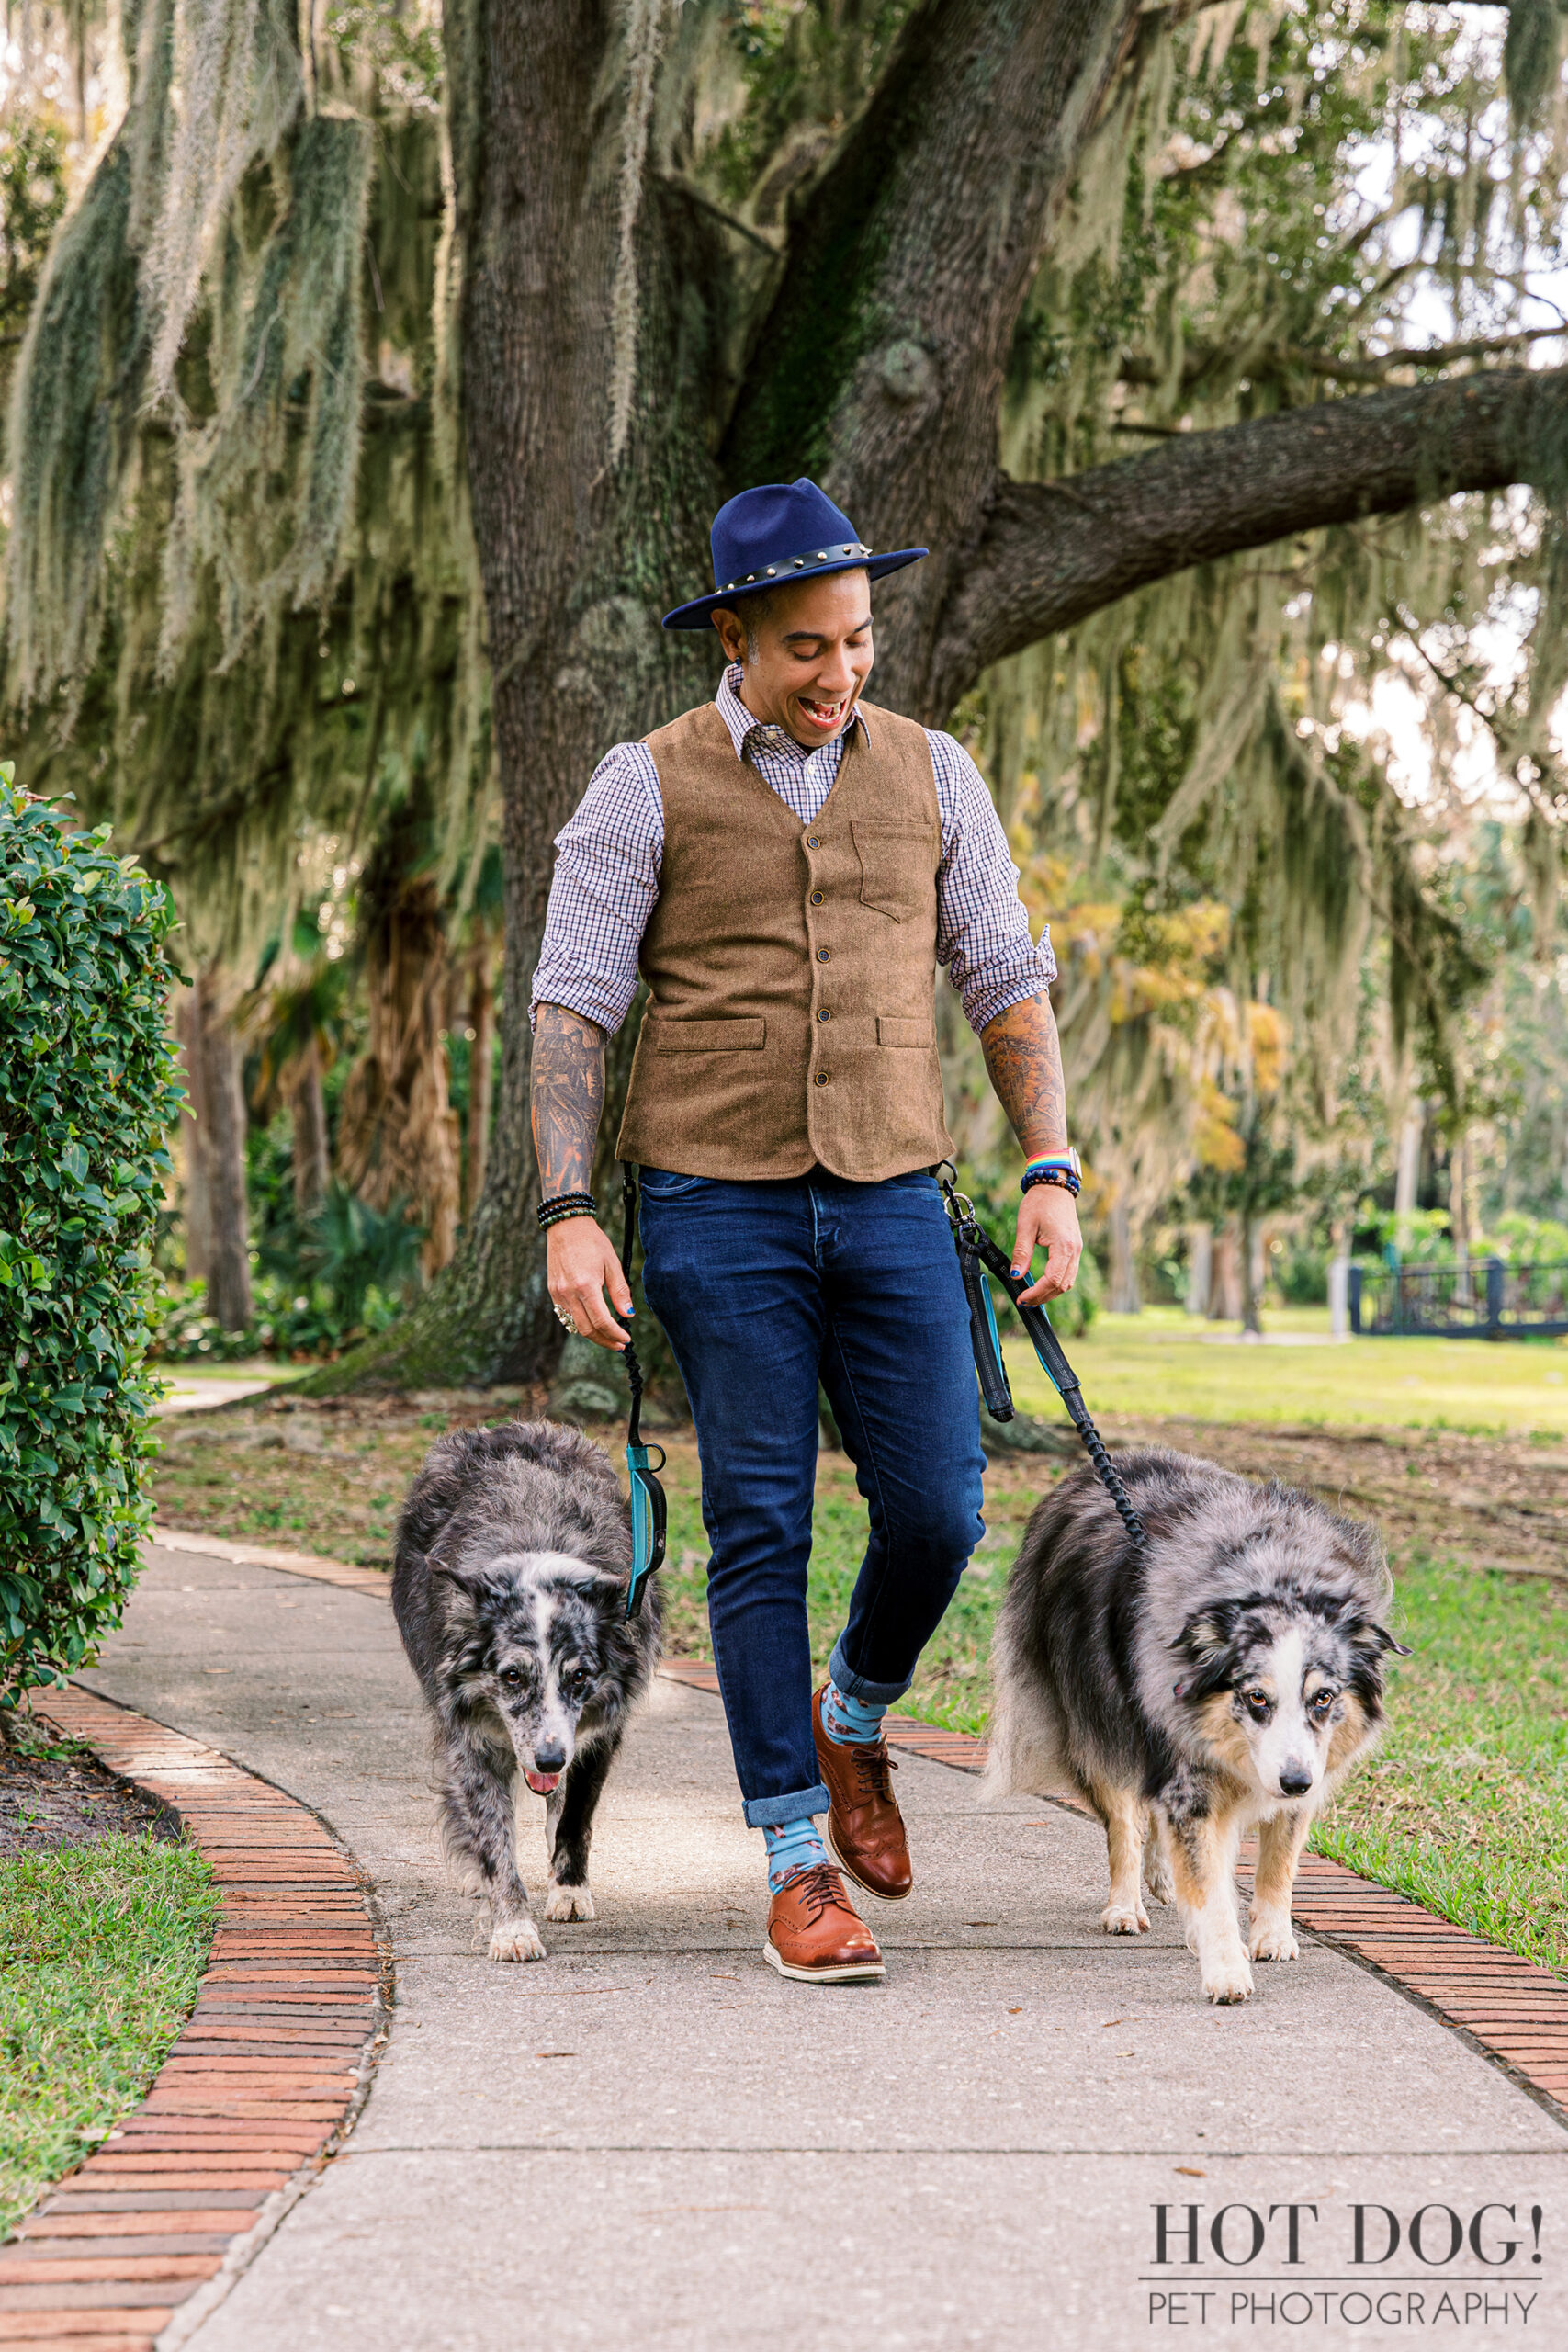 Andres taking a walk with his beloved Border Collies on a scenic trail.